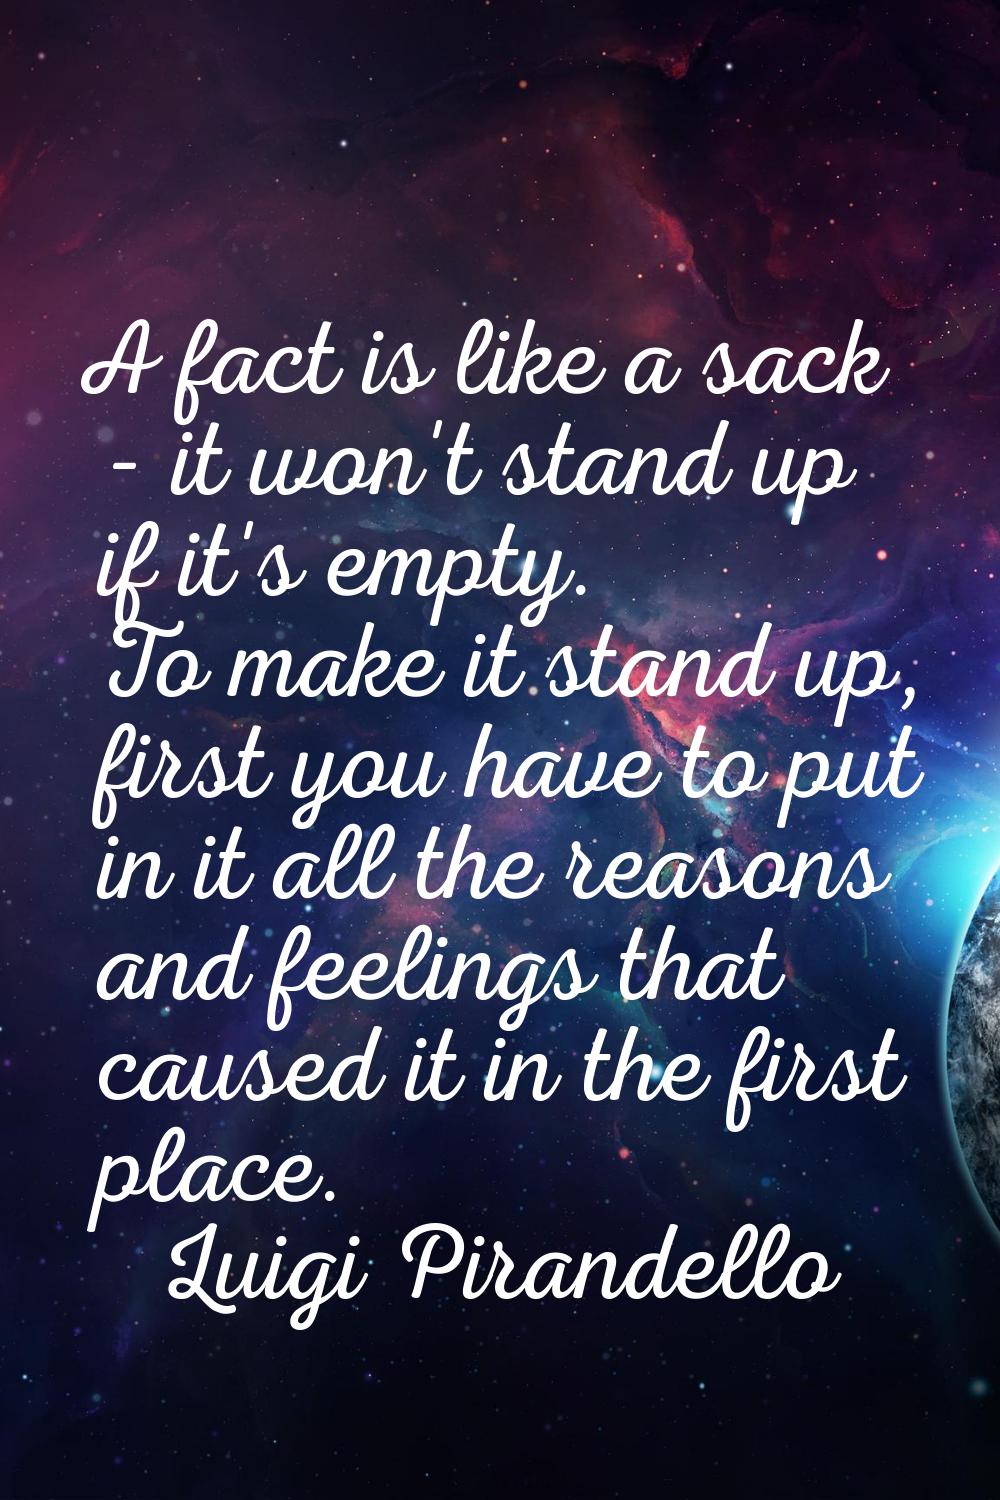 A fact is like a sack - it won't stand up if it's empty. To make it stand up, first you have to put